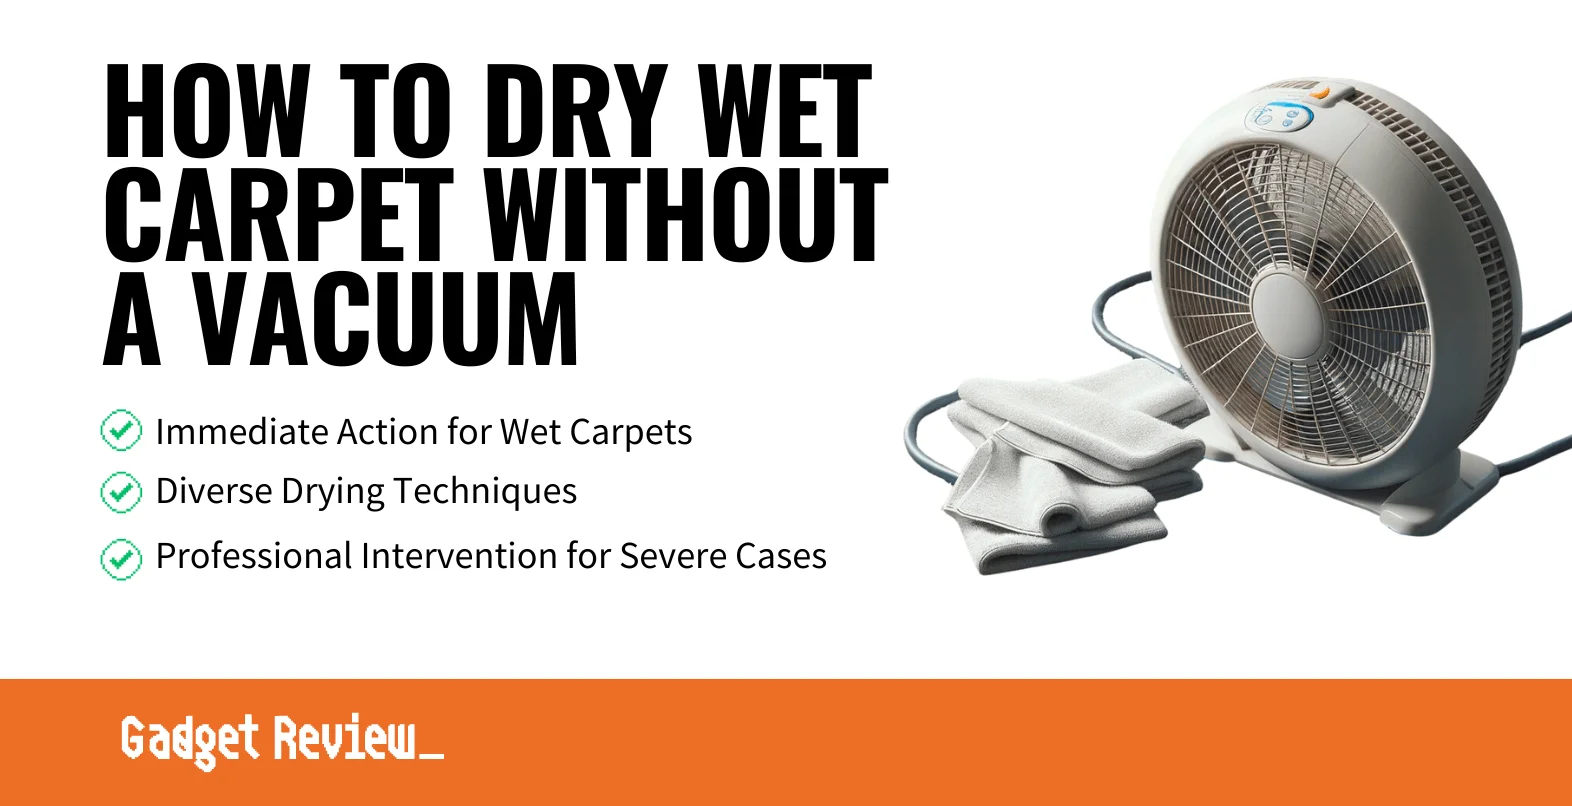 How to Dry Wet Carpet Without a Vacuum